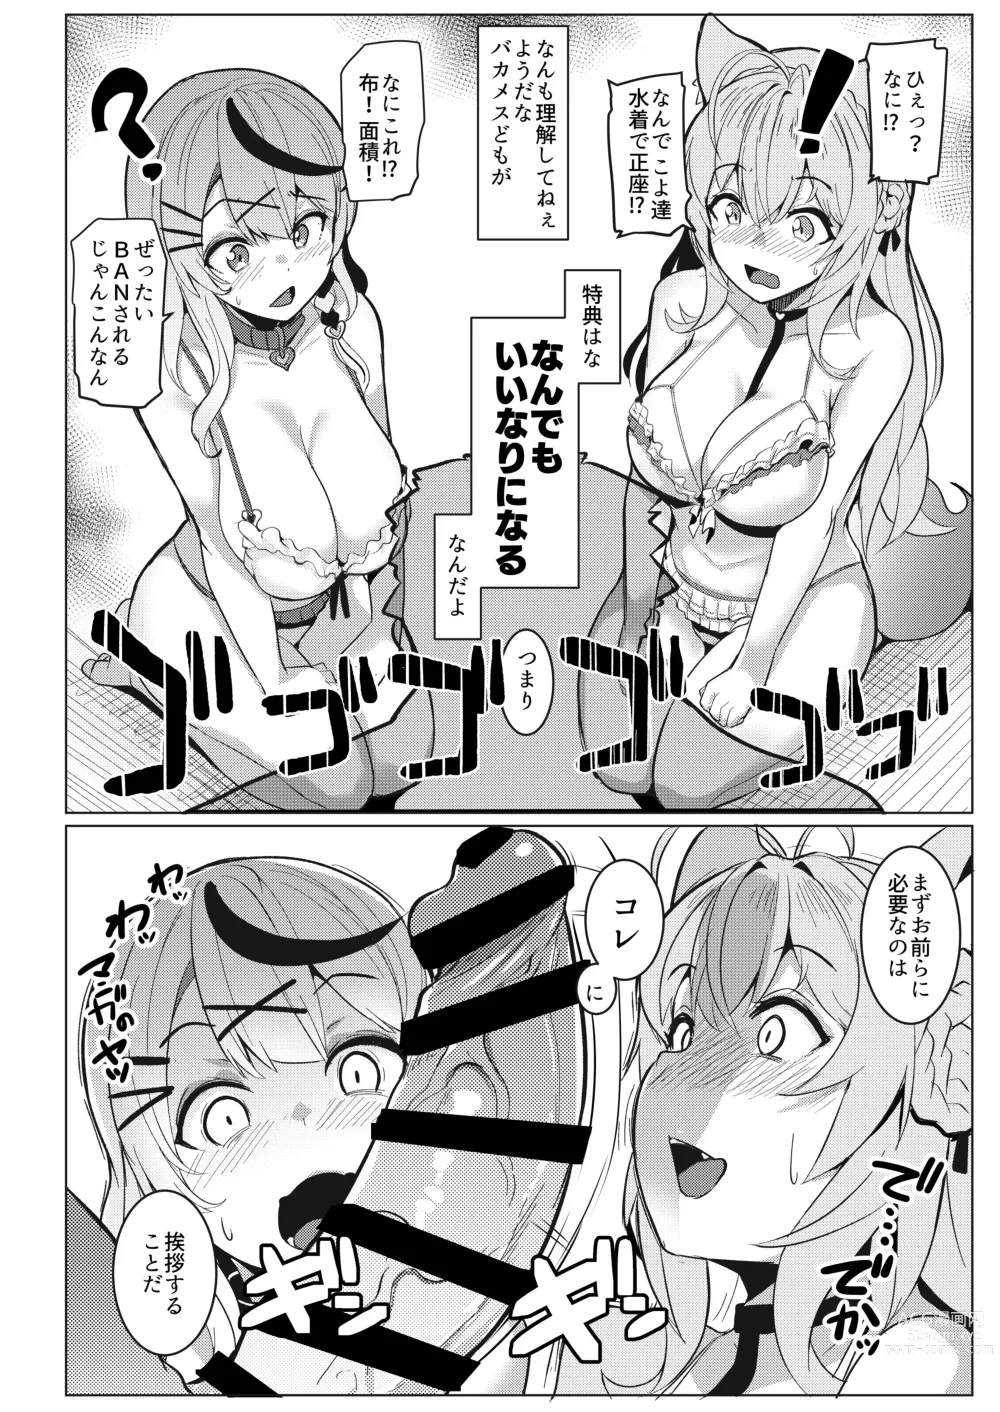 Page 4 of doujinshi Osucollab